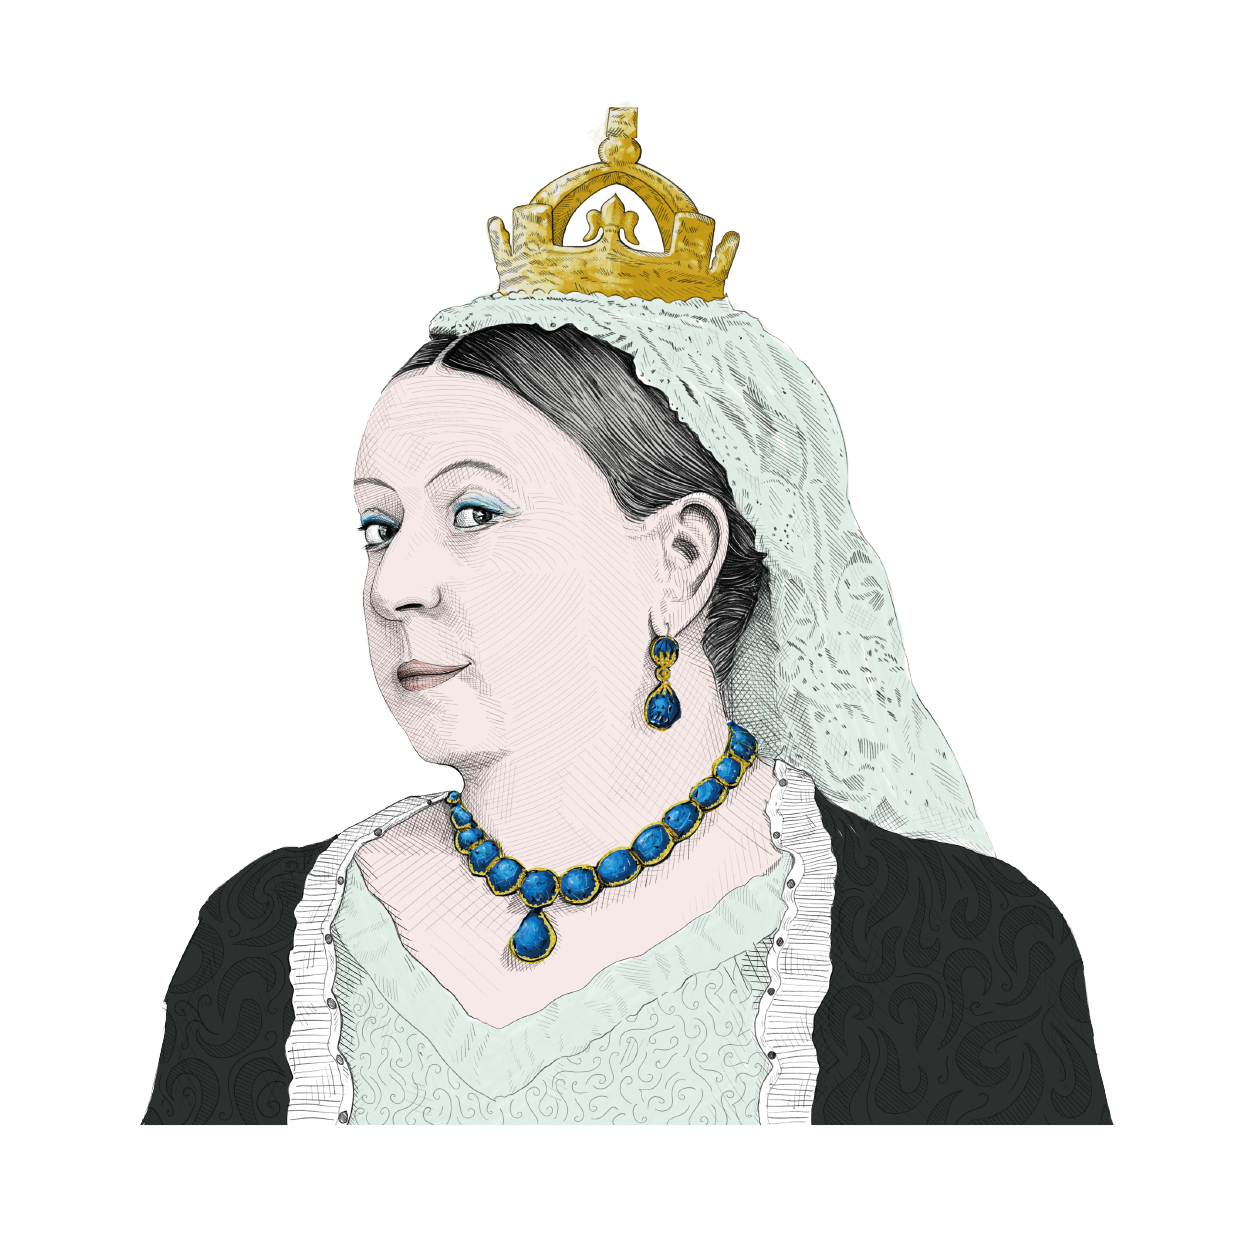 Queen Victoria's head with a gold crown & blue necklace